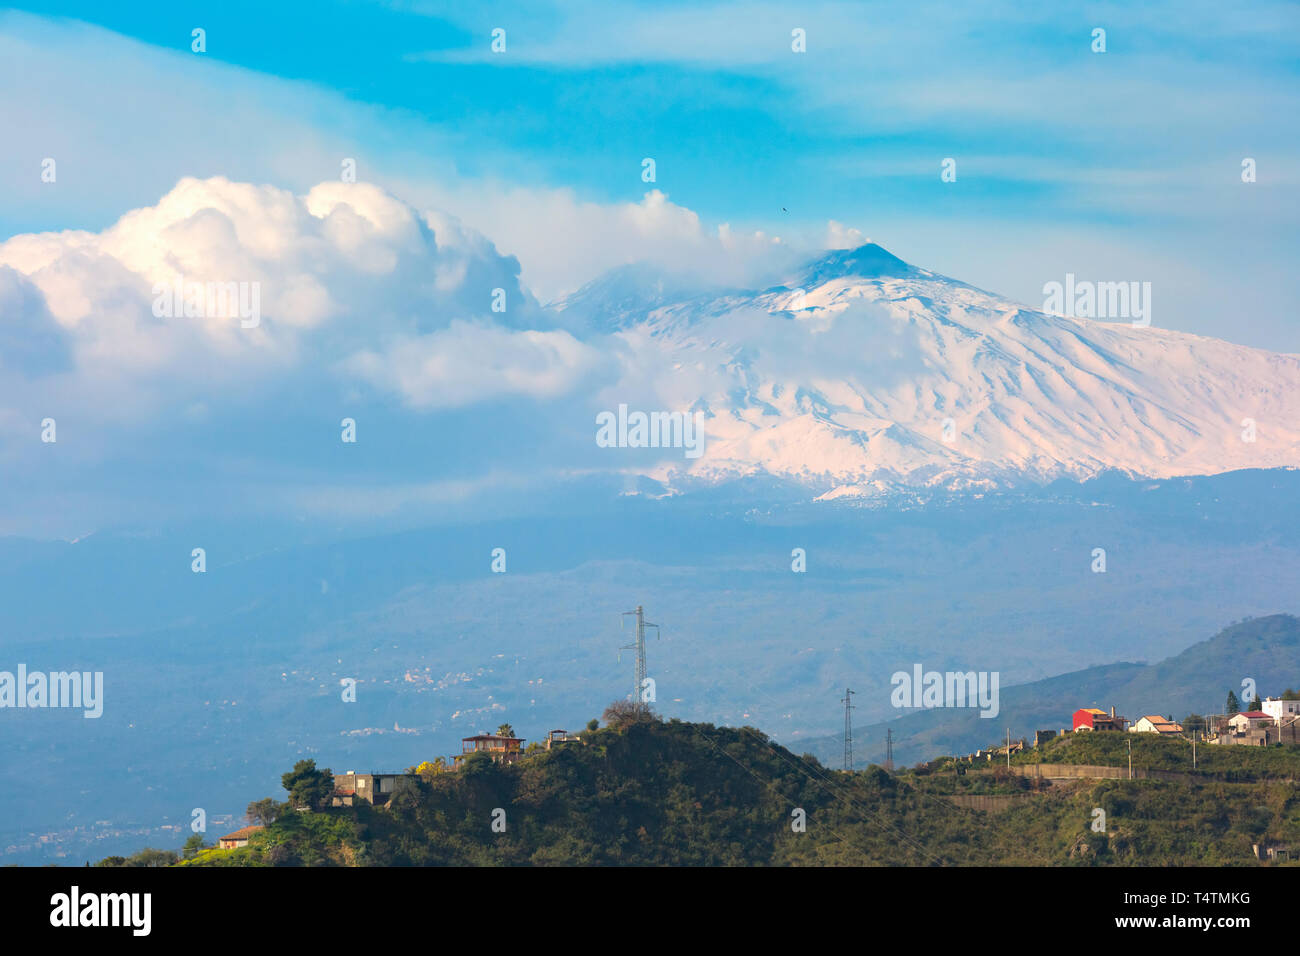 Smoking snow-capped Mount Etna volcano at sunrise, as seen from Taormina, Sicily Stock Photo